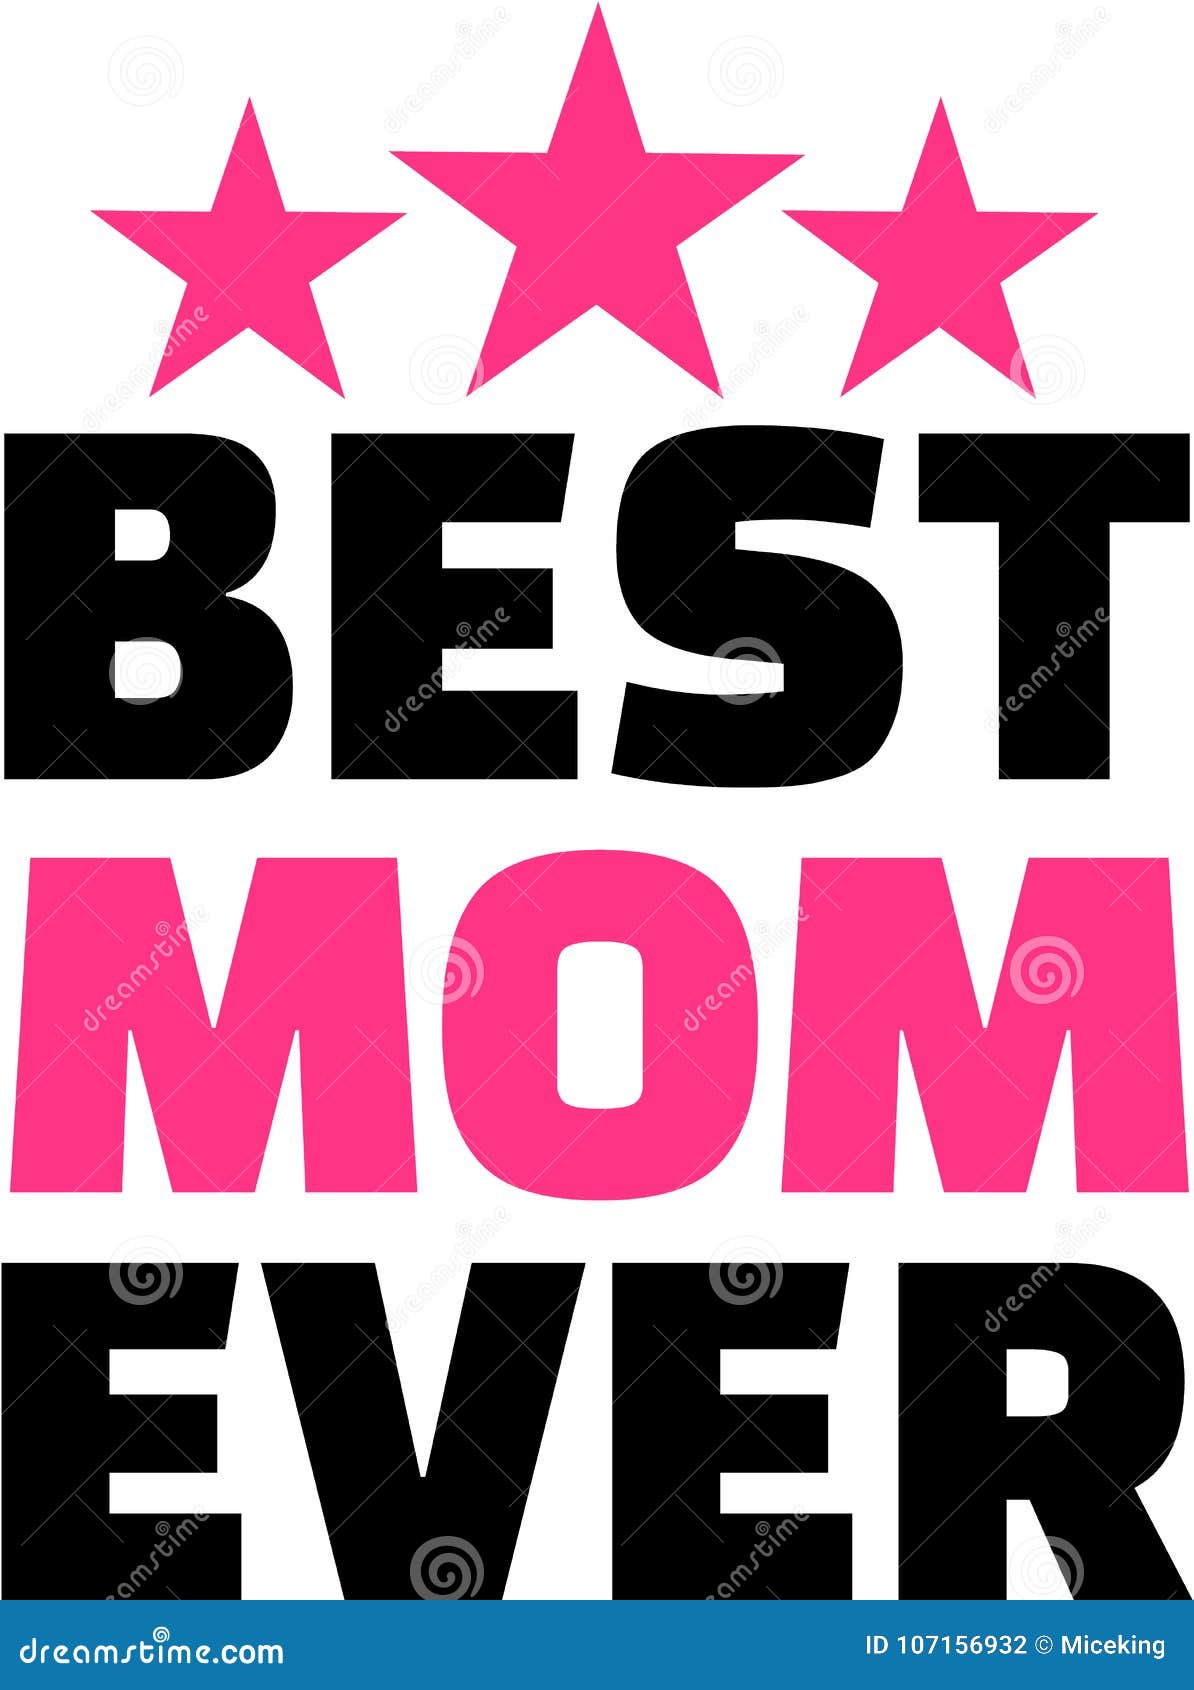 Free Vector  Best mom ever